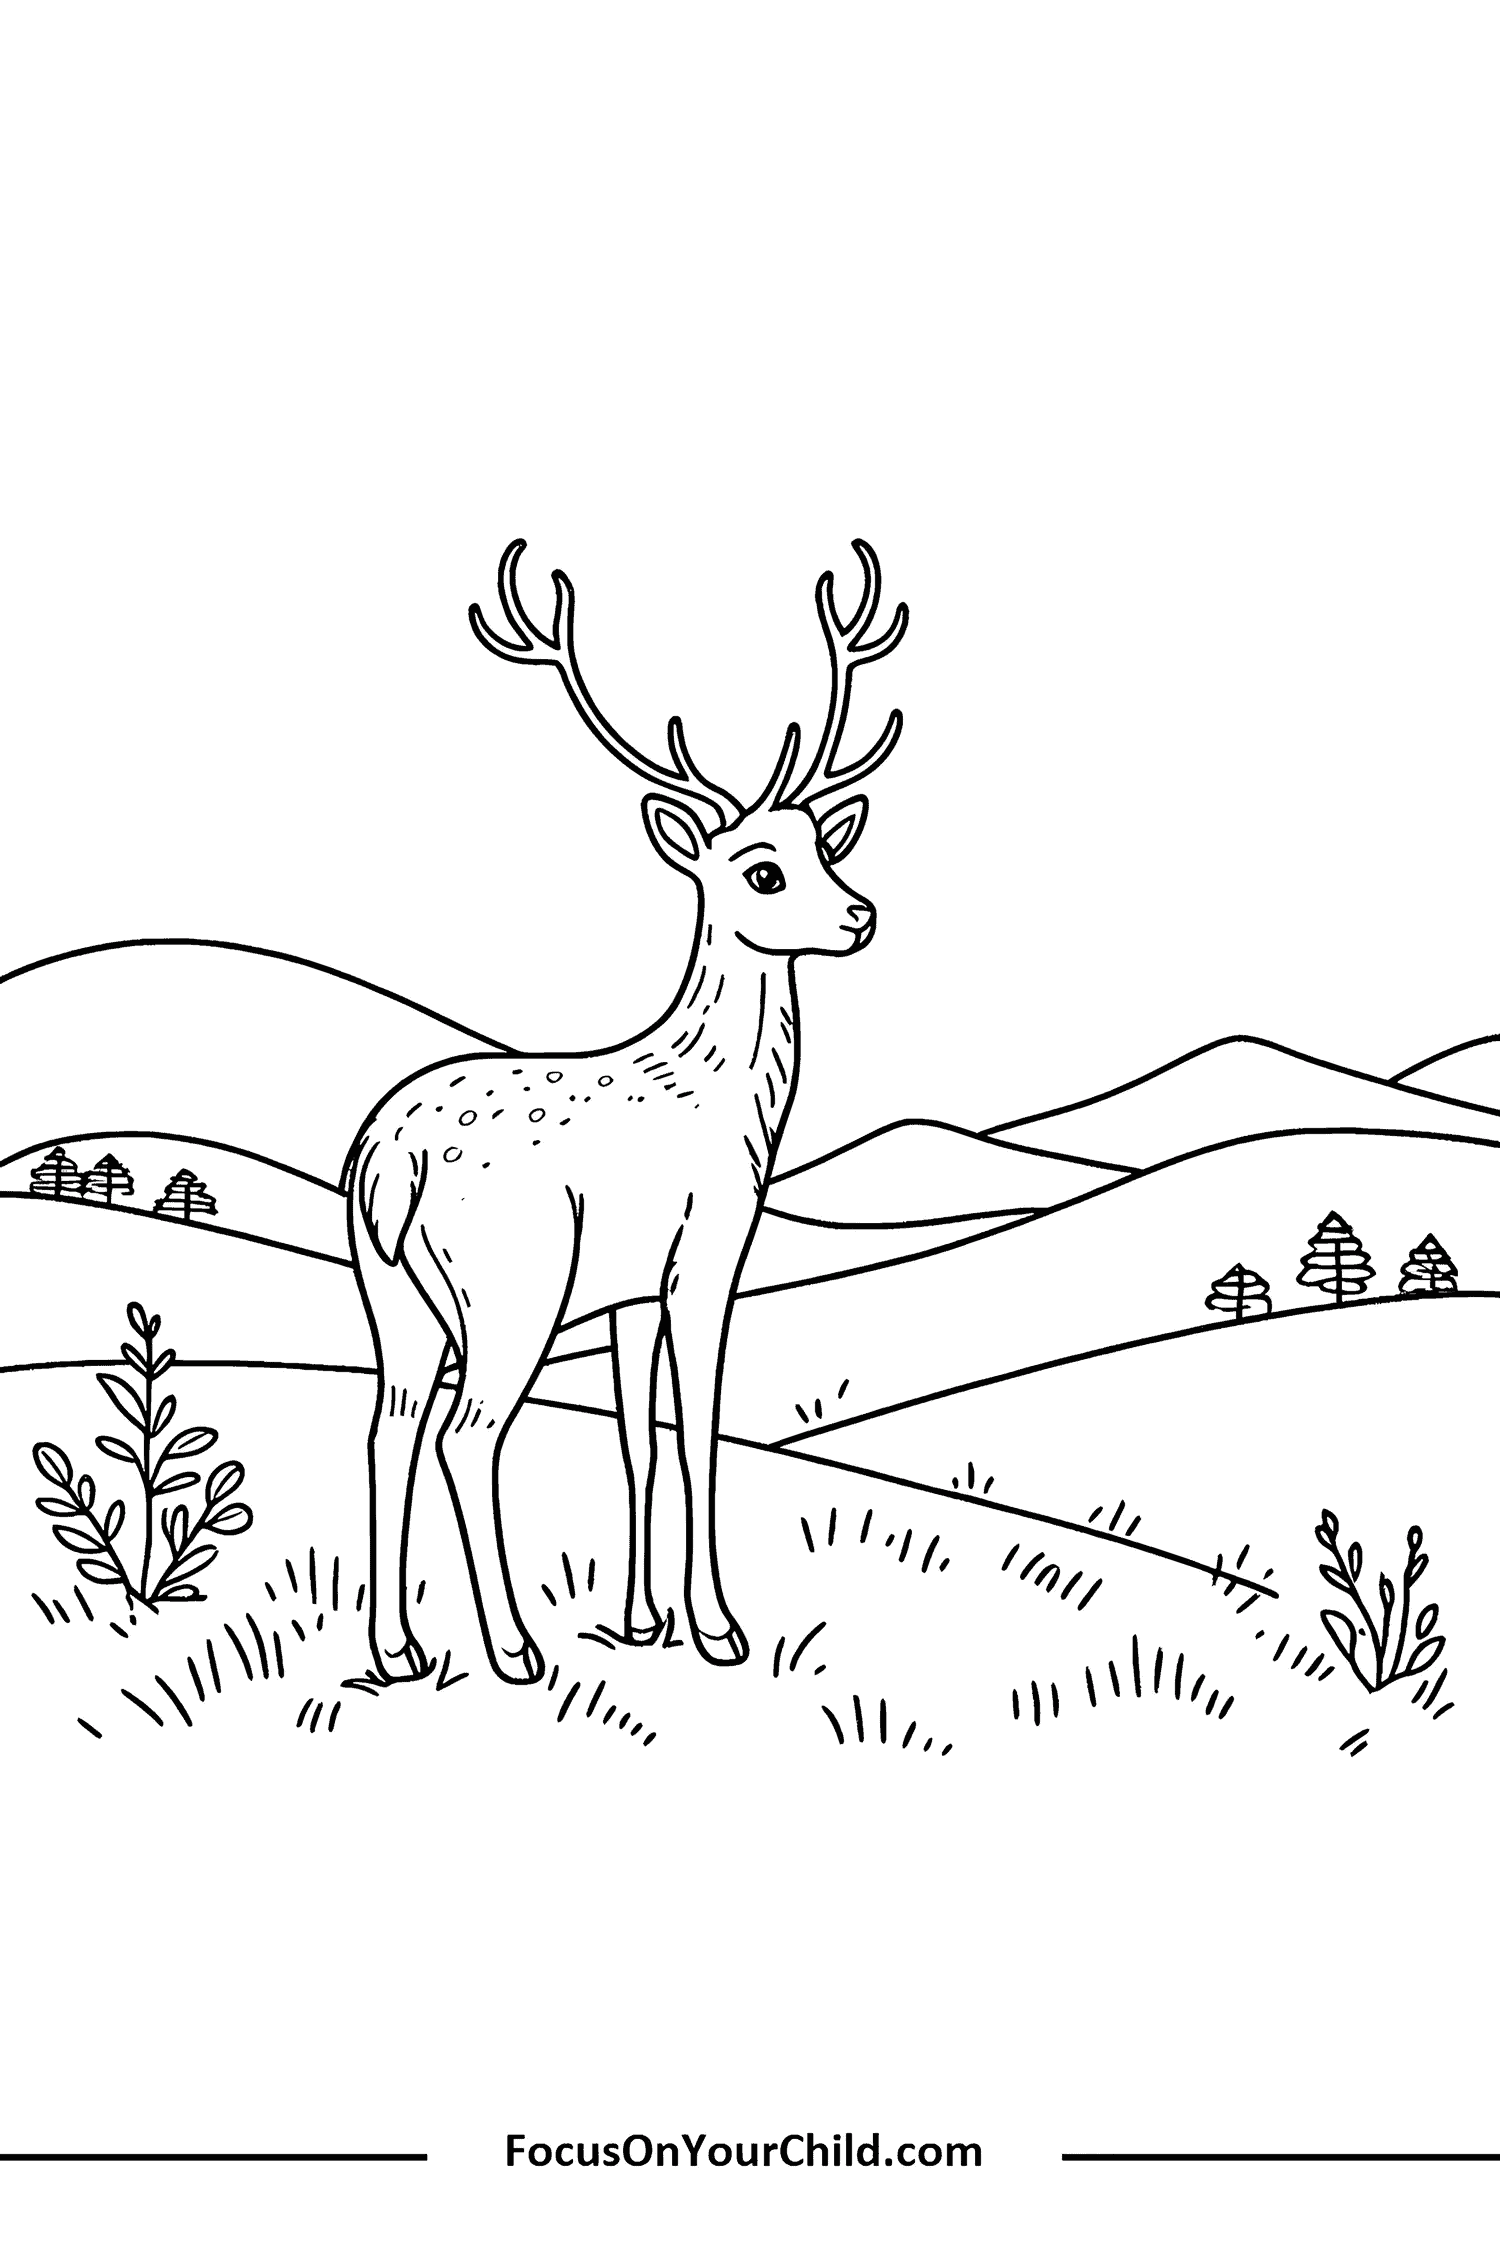 Deer in peaceful landscape, ideal for coloring activities.